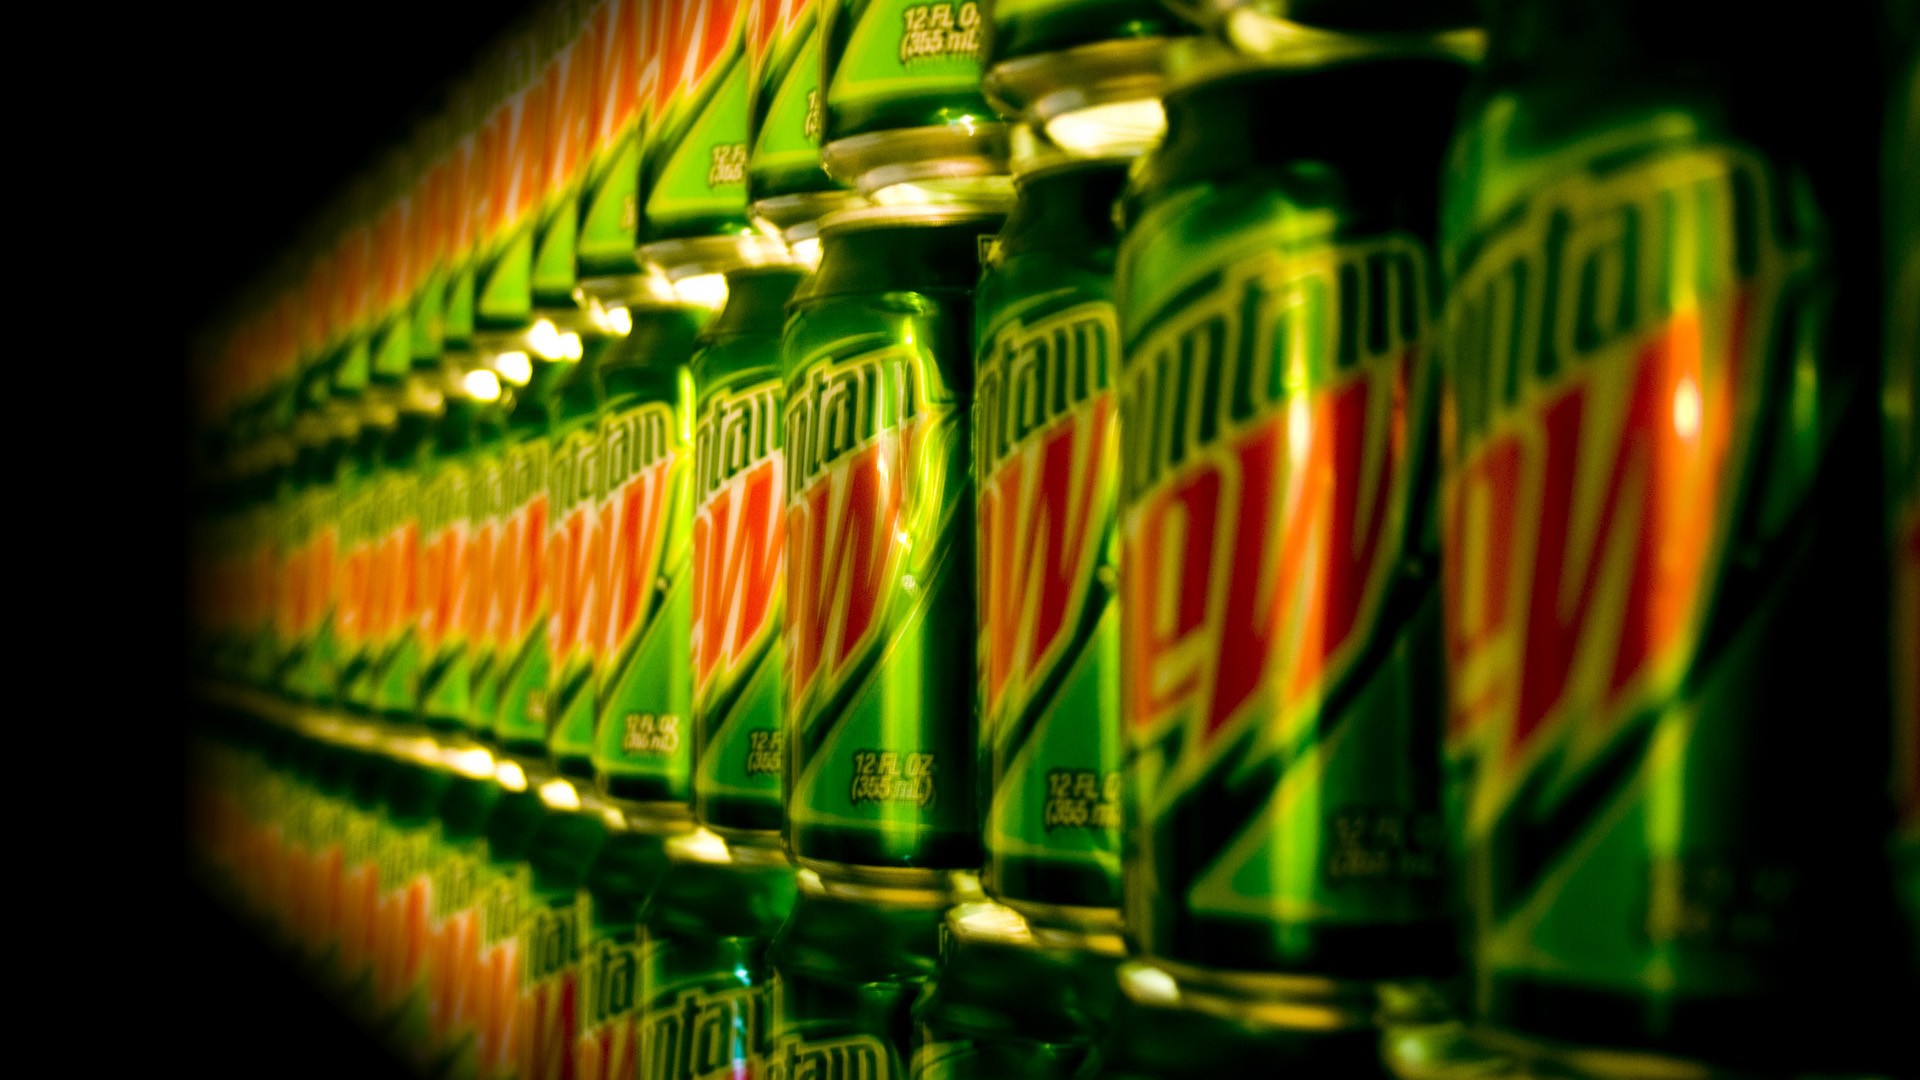 Mountain Dew Can Logo Reflection Metal Black Red Green 1920x1080